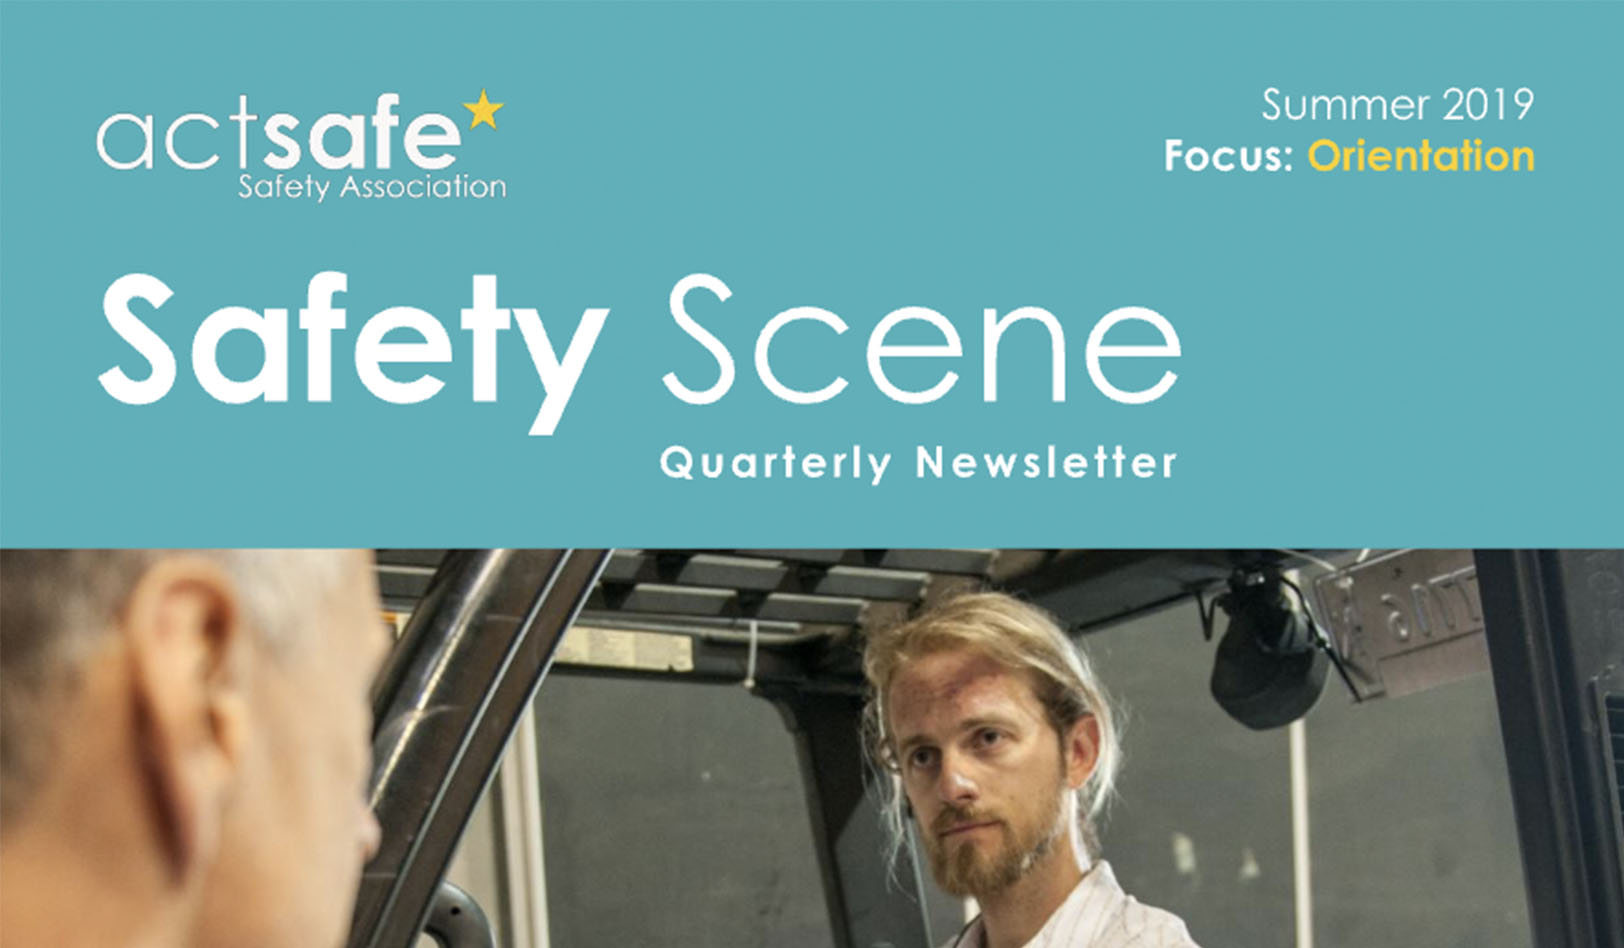 Safety scenes